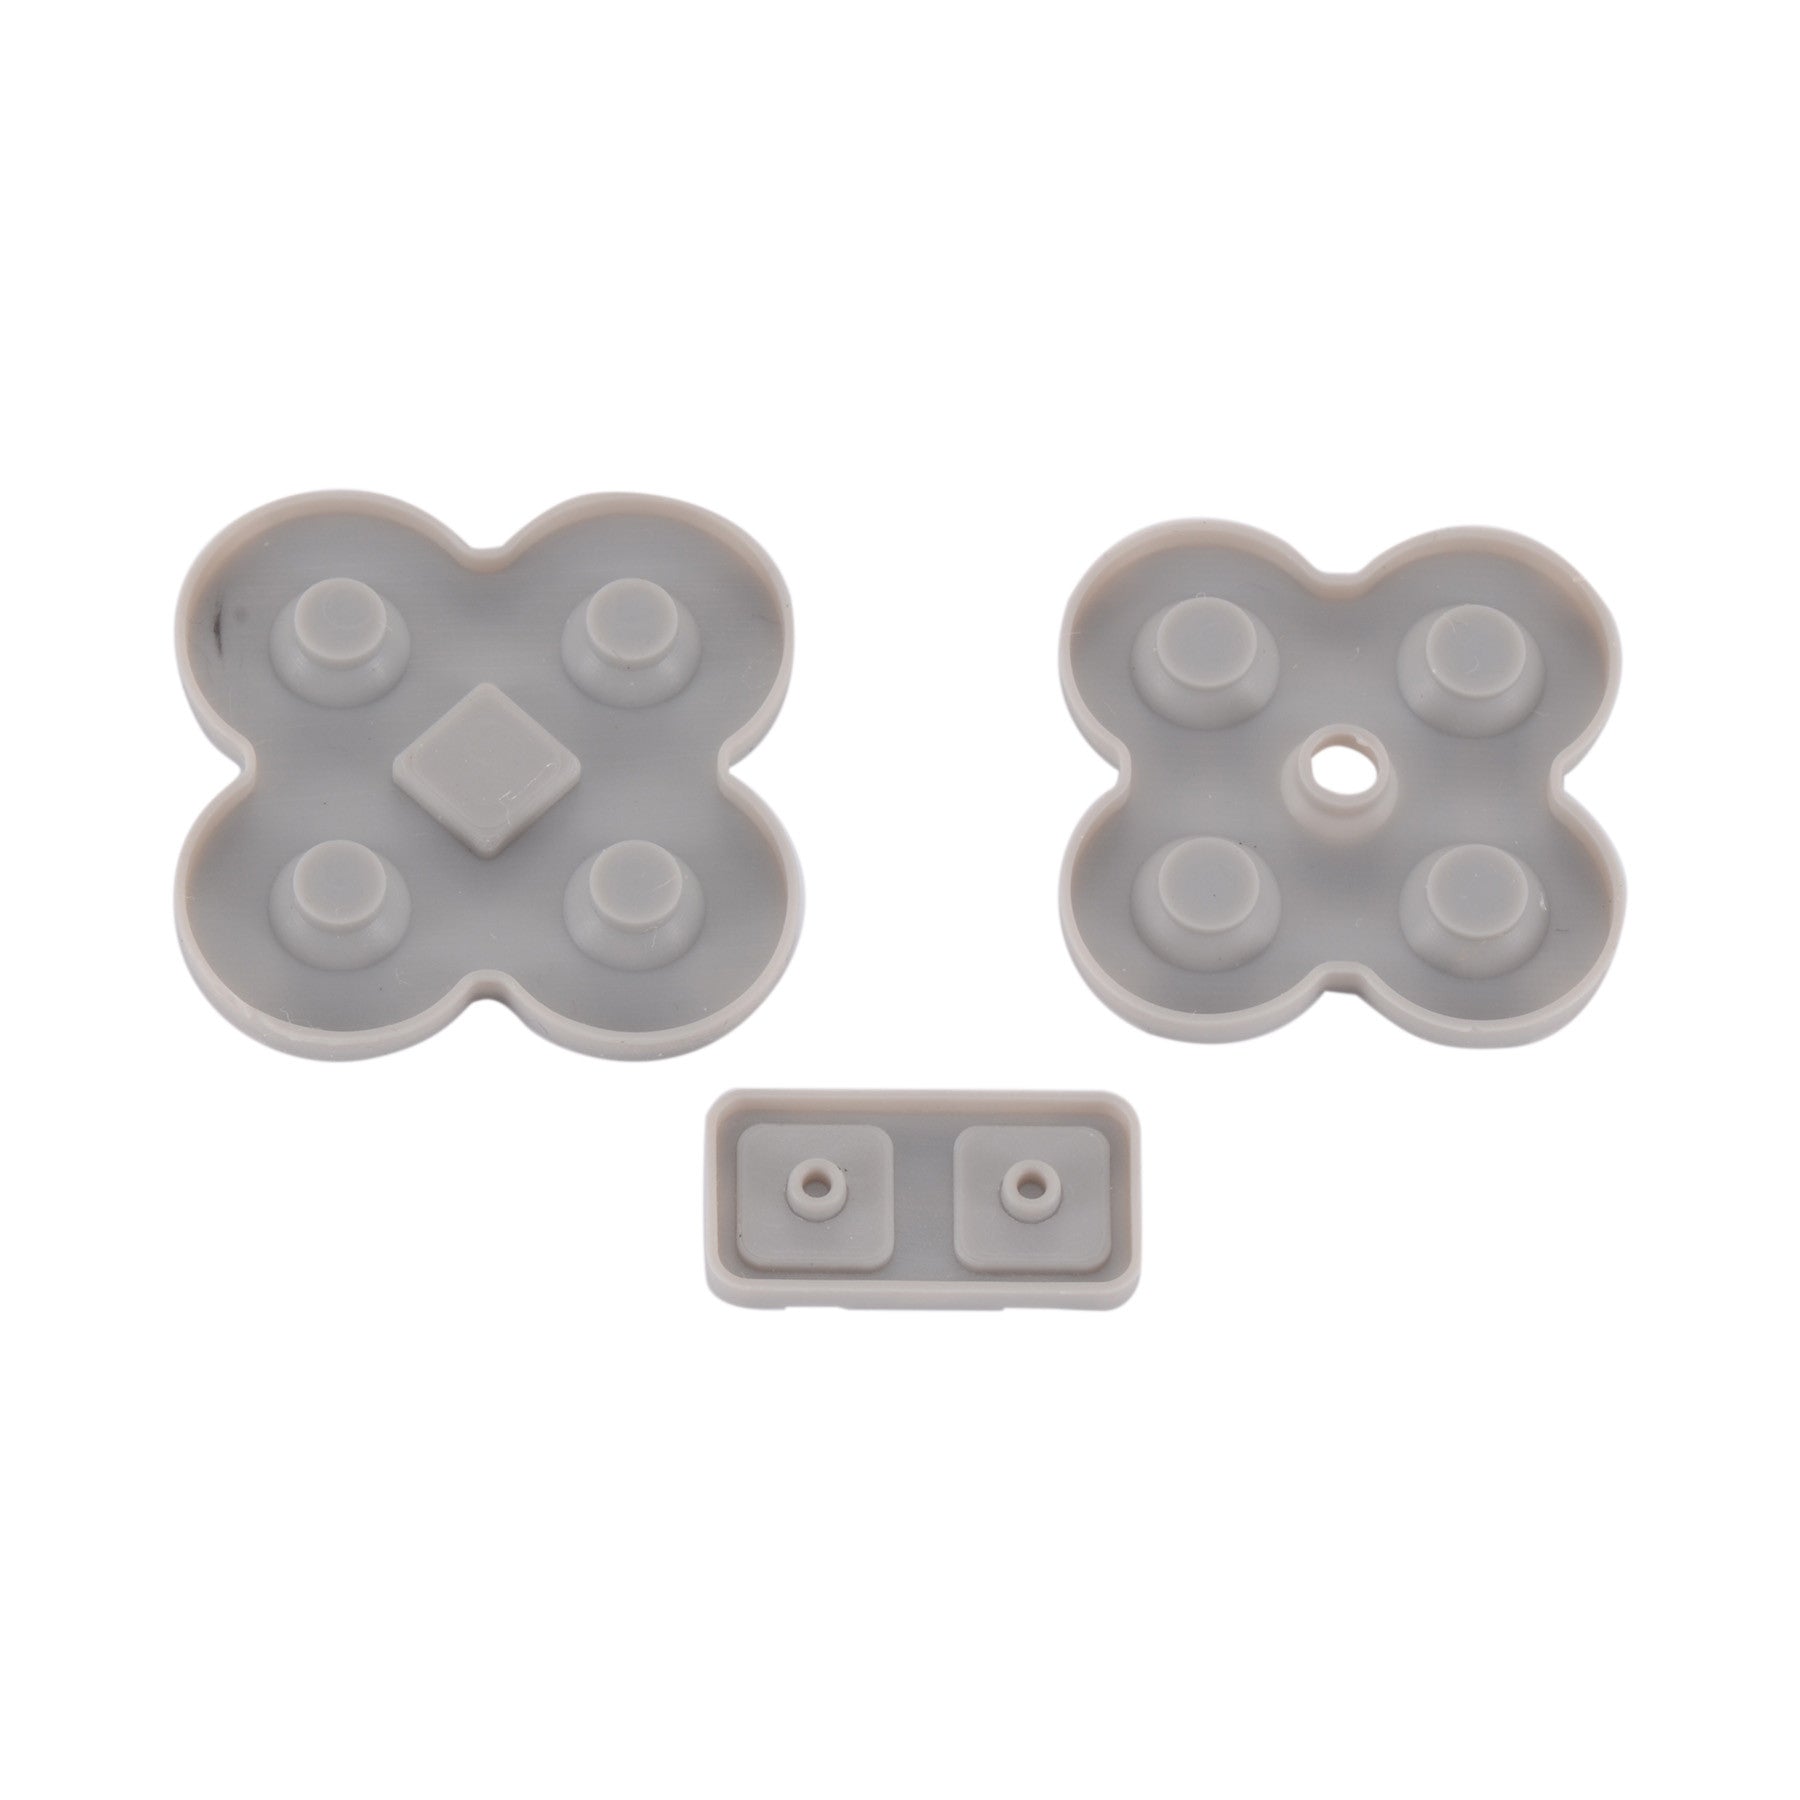 eXtremeRate Retail 1set Replacement Rubber Conductive Adhesive Button Pad For Nintendo DS Lite NDSL - GNDL0004